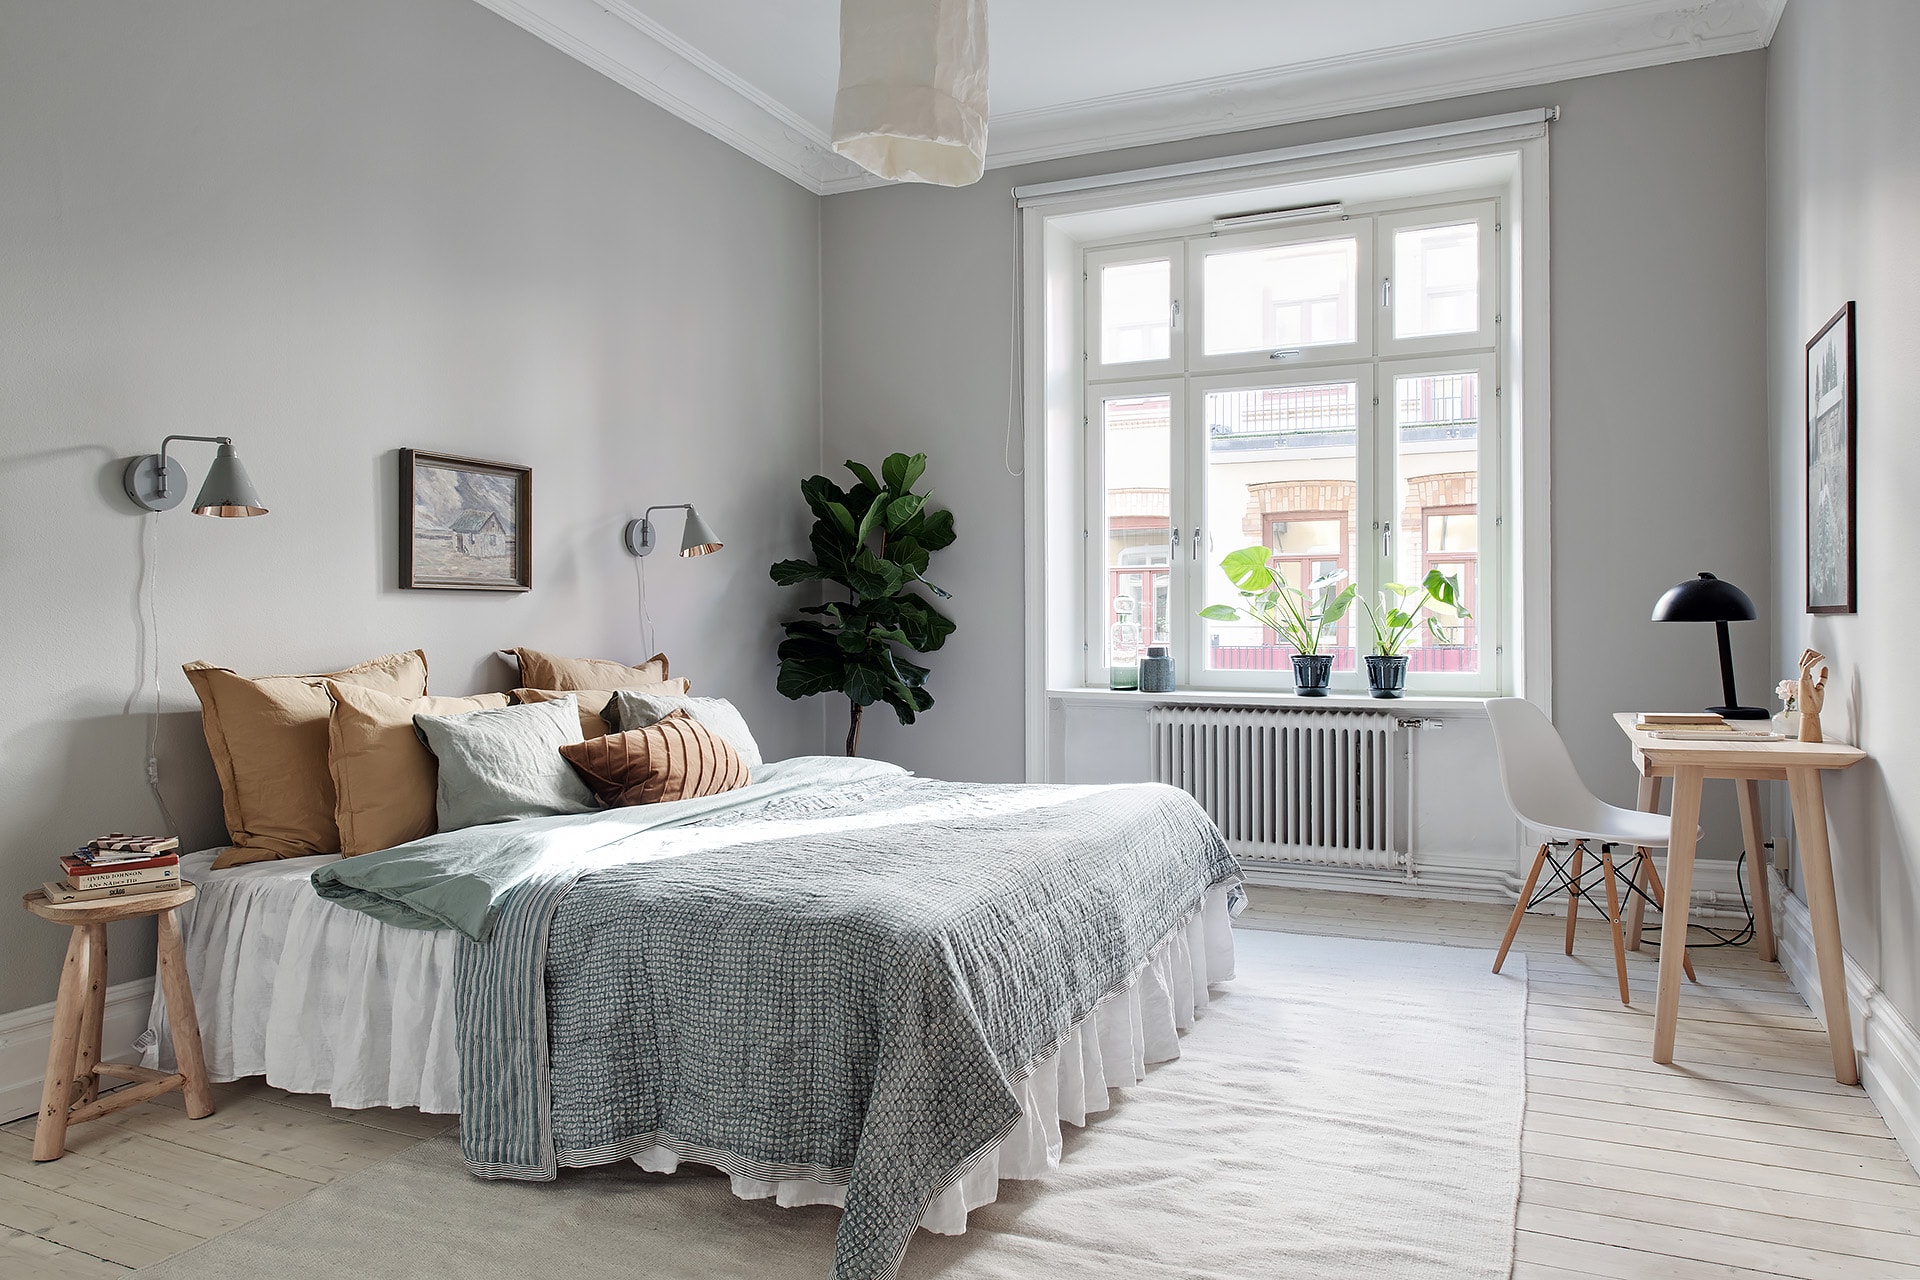 A light grey bedroom with warm tones in the textiles, fiddle fig tree in the corner